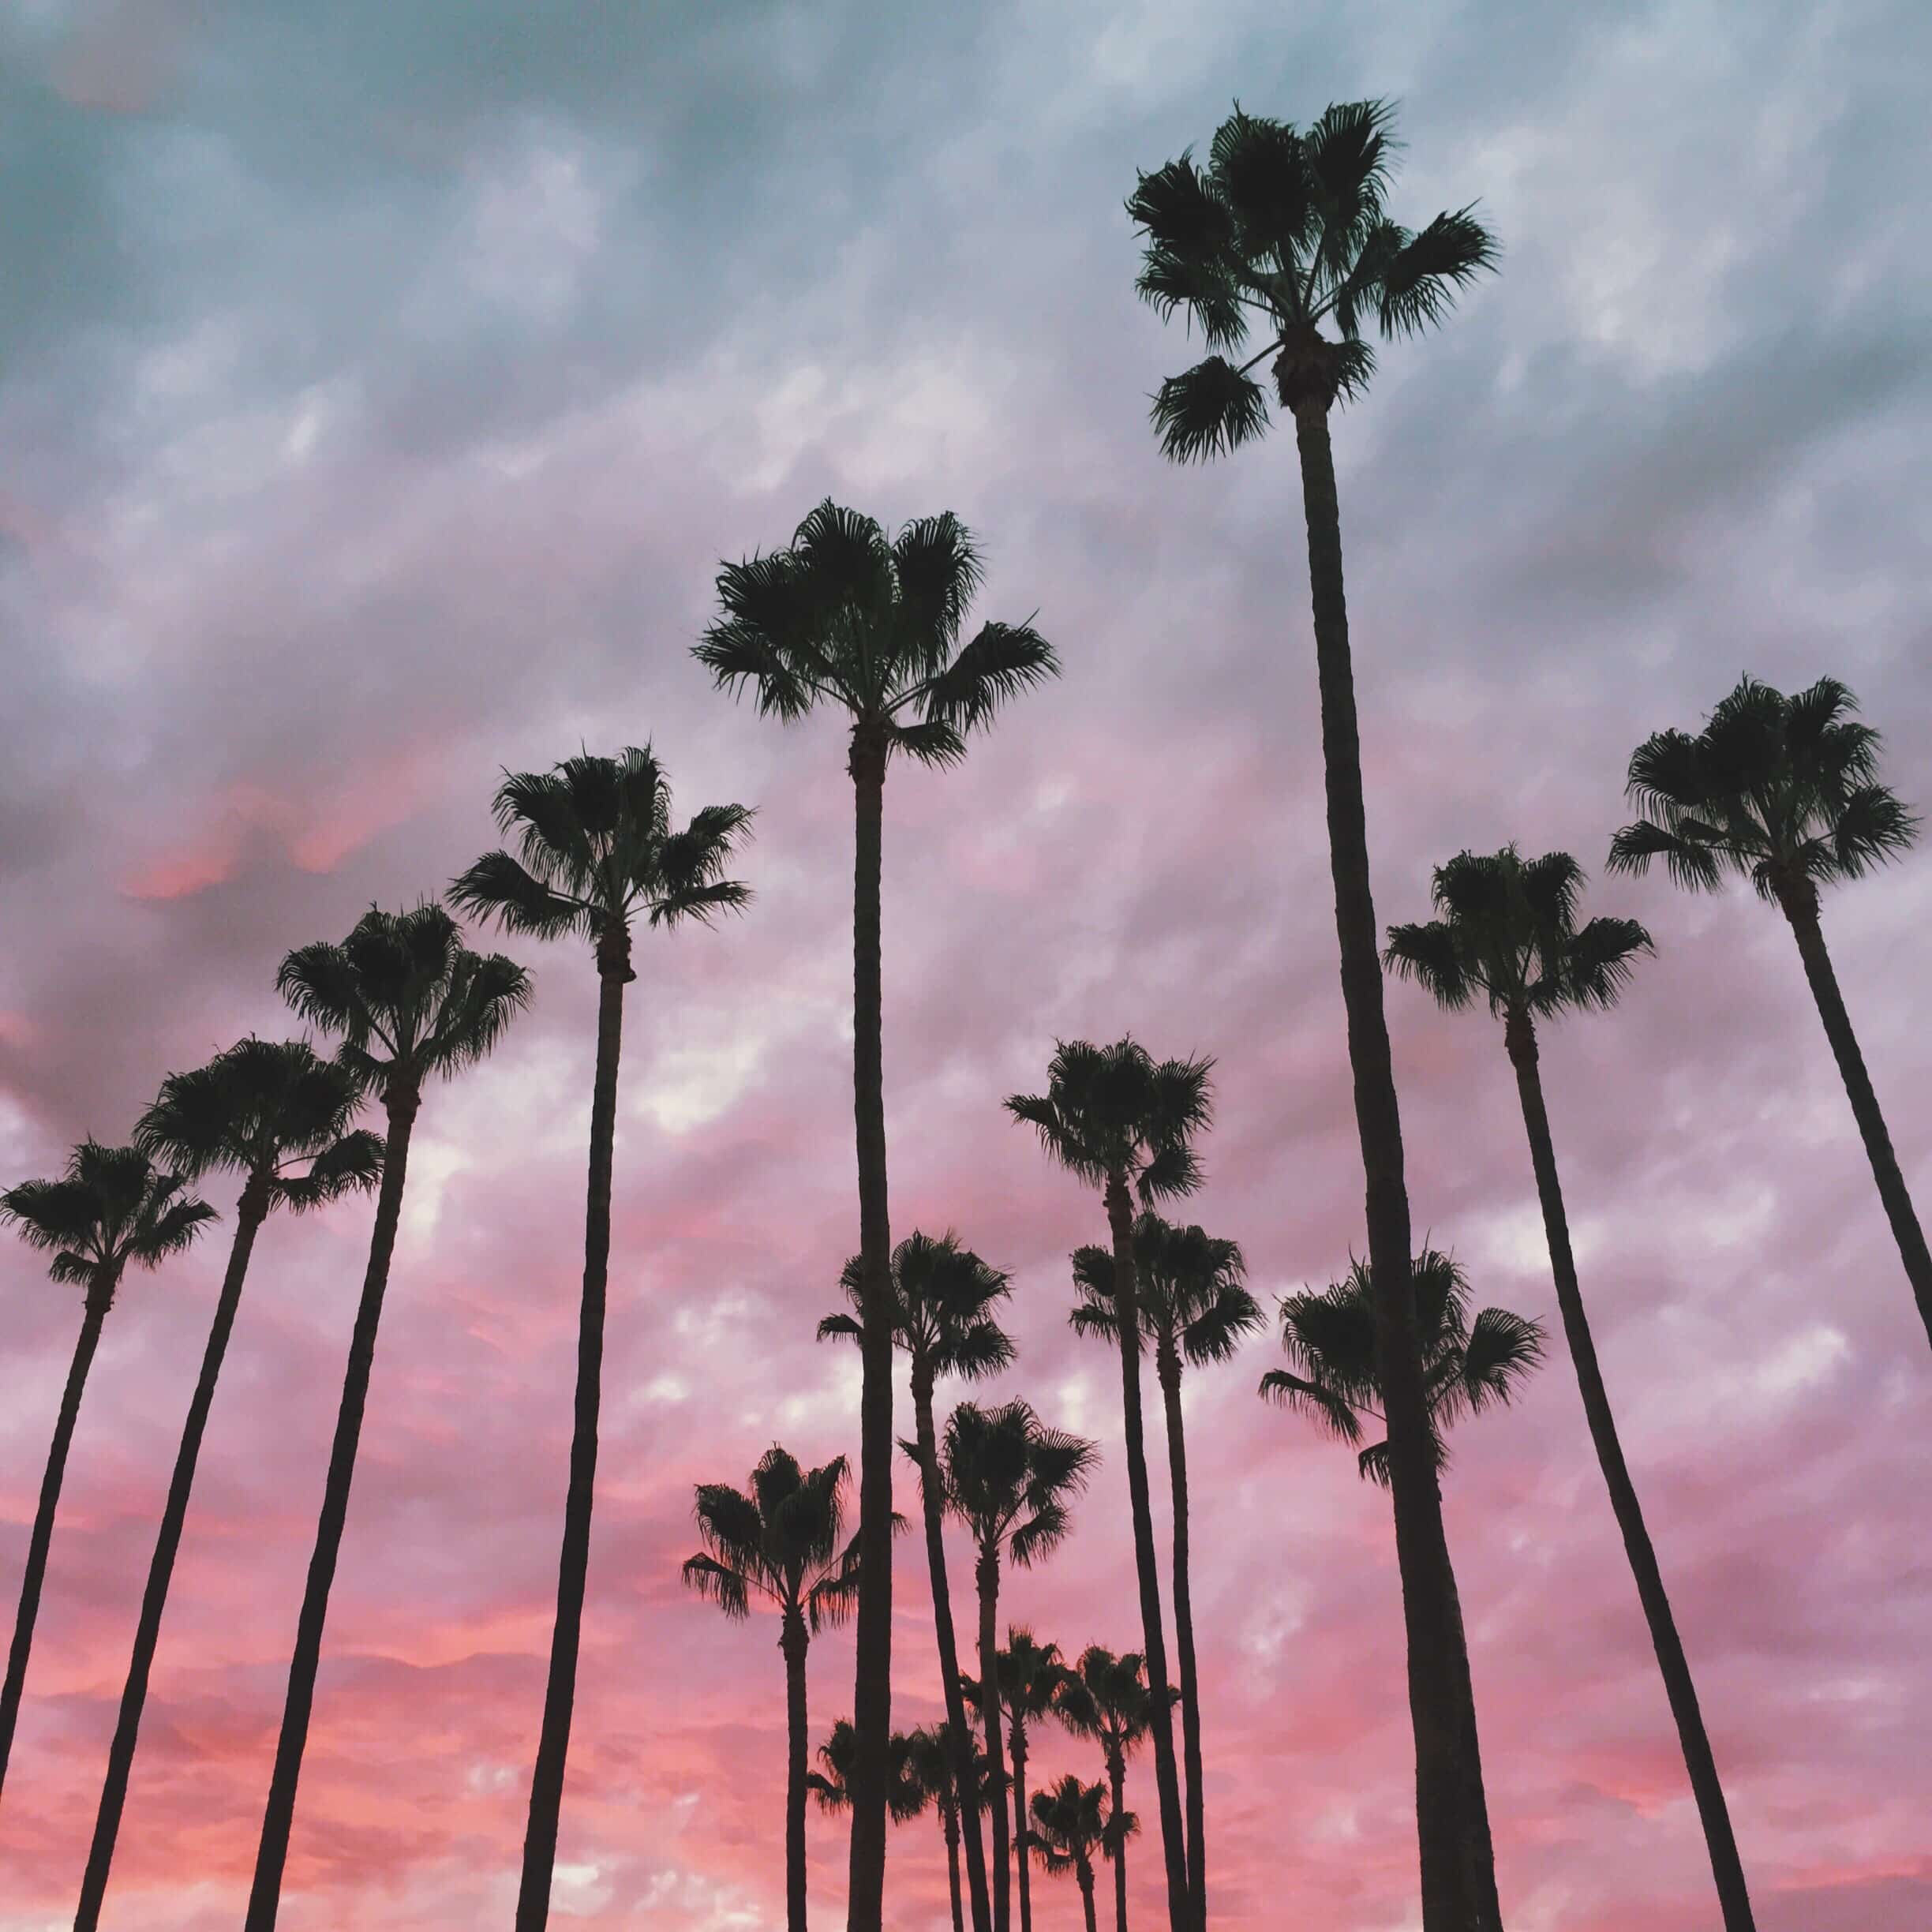 San Diego Palm Trees at sunset